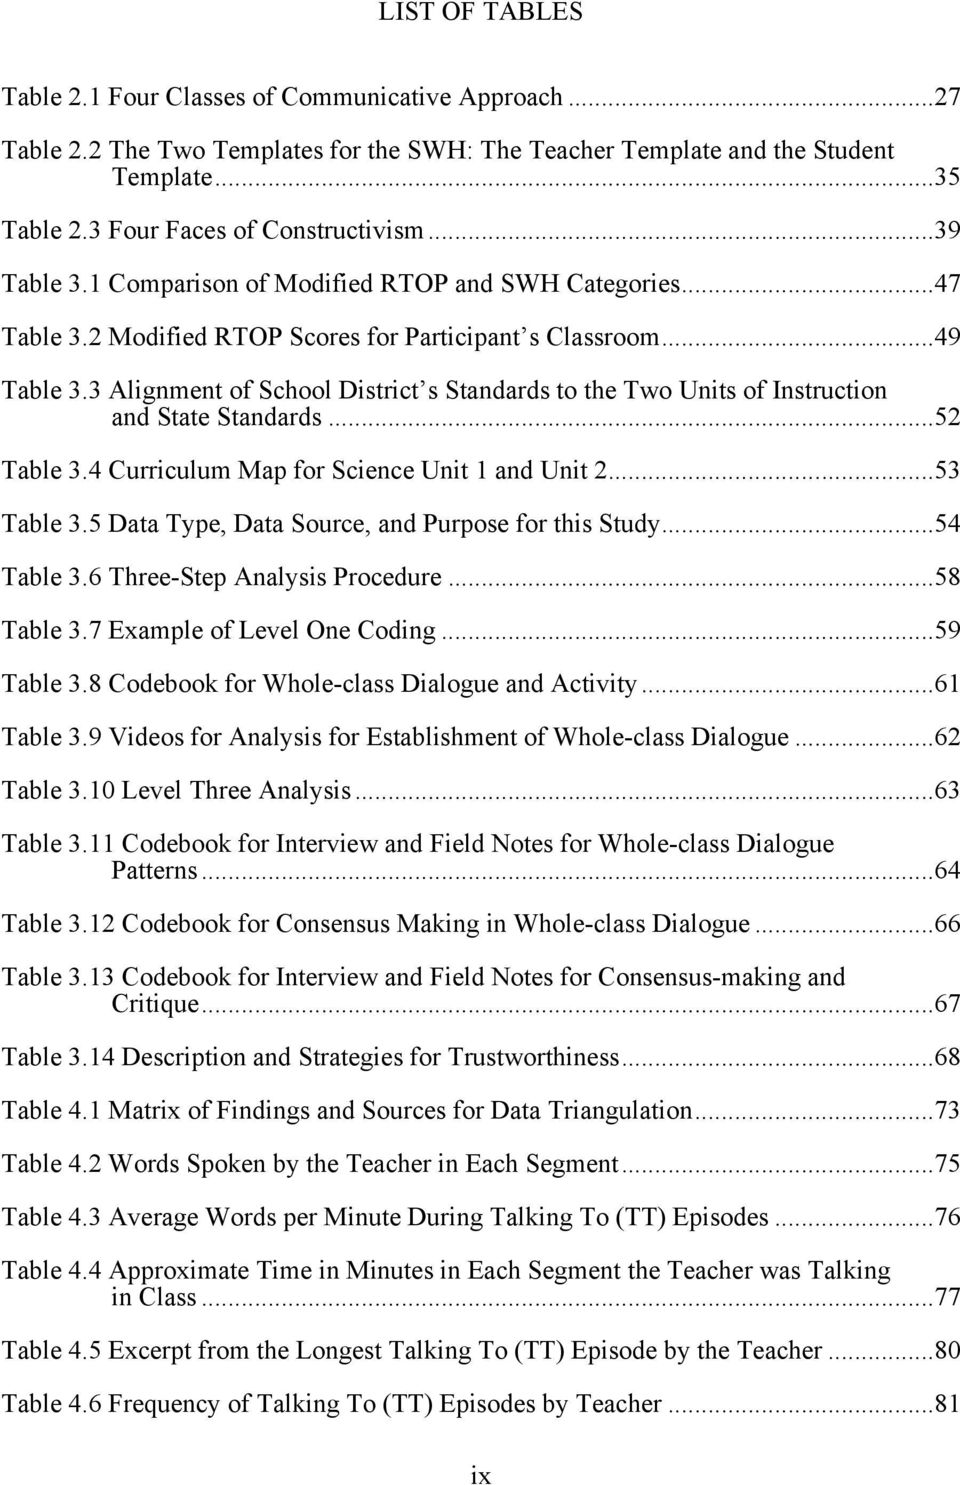 ..52! Table 3.4 Curriculum Map for Science Unit 1 and Unit 2...53! Table 3.5 Data Type, Data Source, and Purpose for this Study...54! Table 3.6 Three-Step Analysis Procedure...58! Table 3.7 Example of Level One Coding.